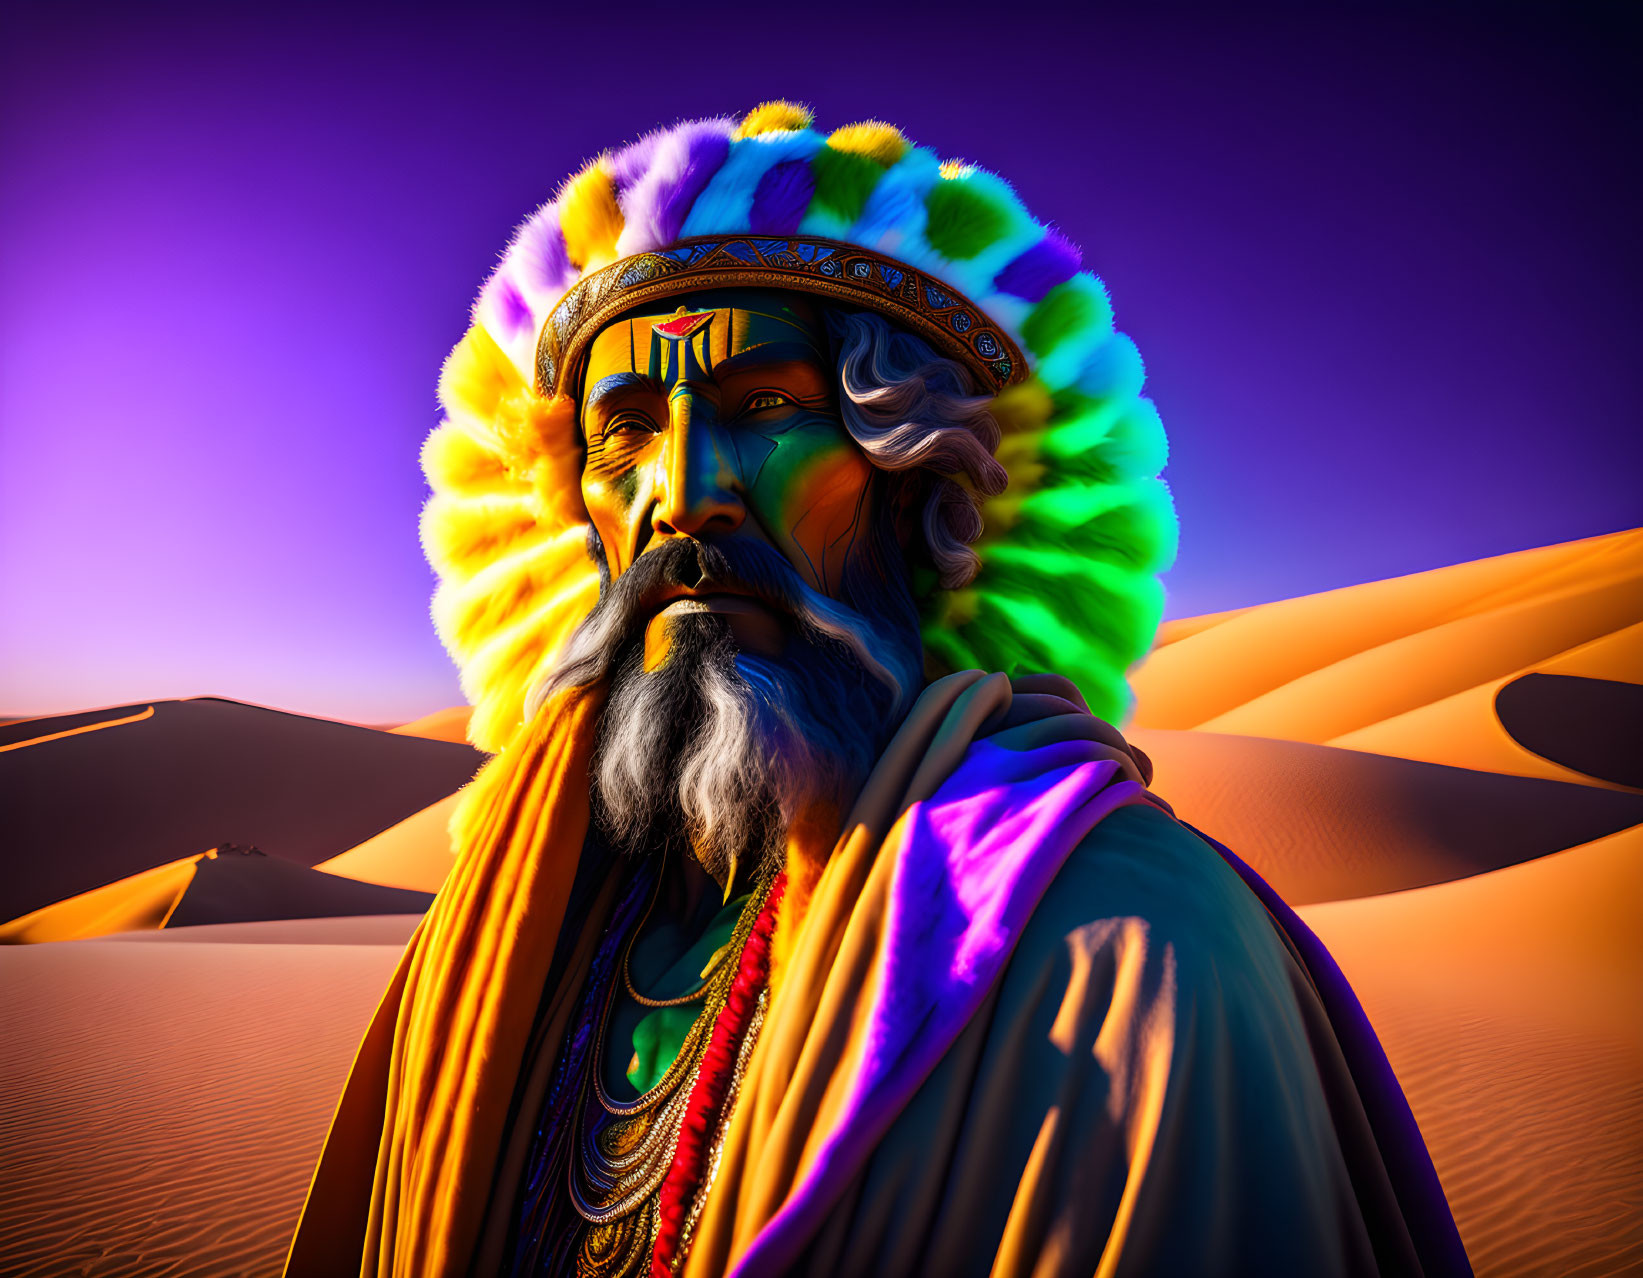 Colorful illustration of wise man in regal attire in desert at dusk